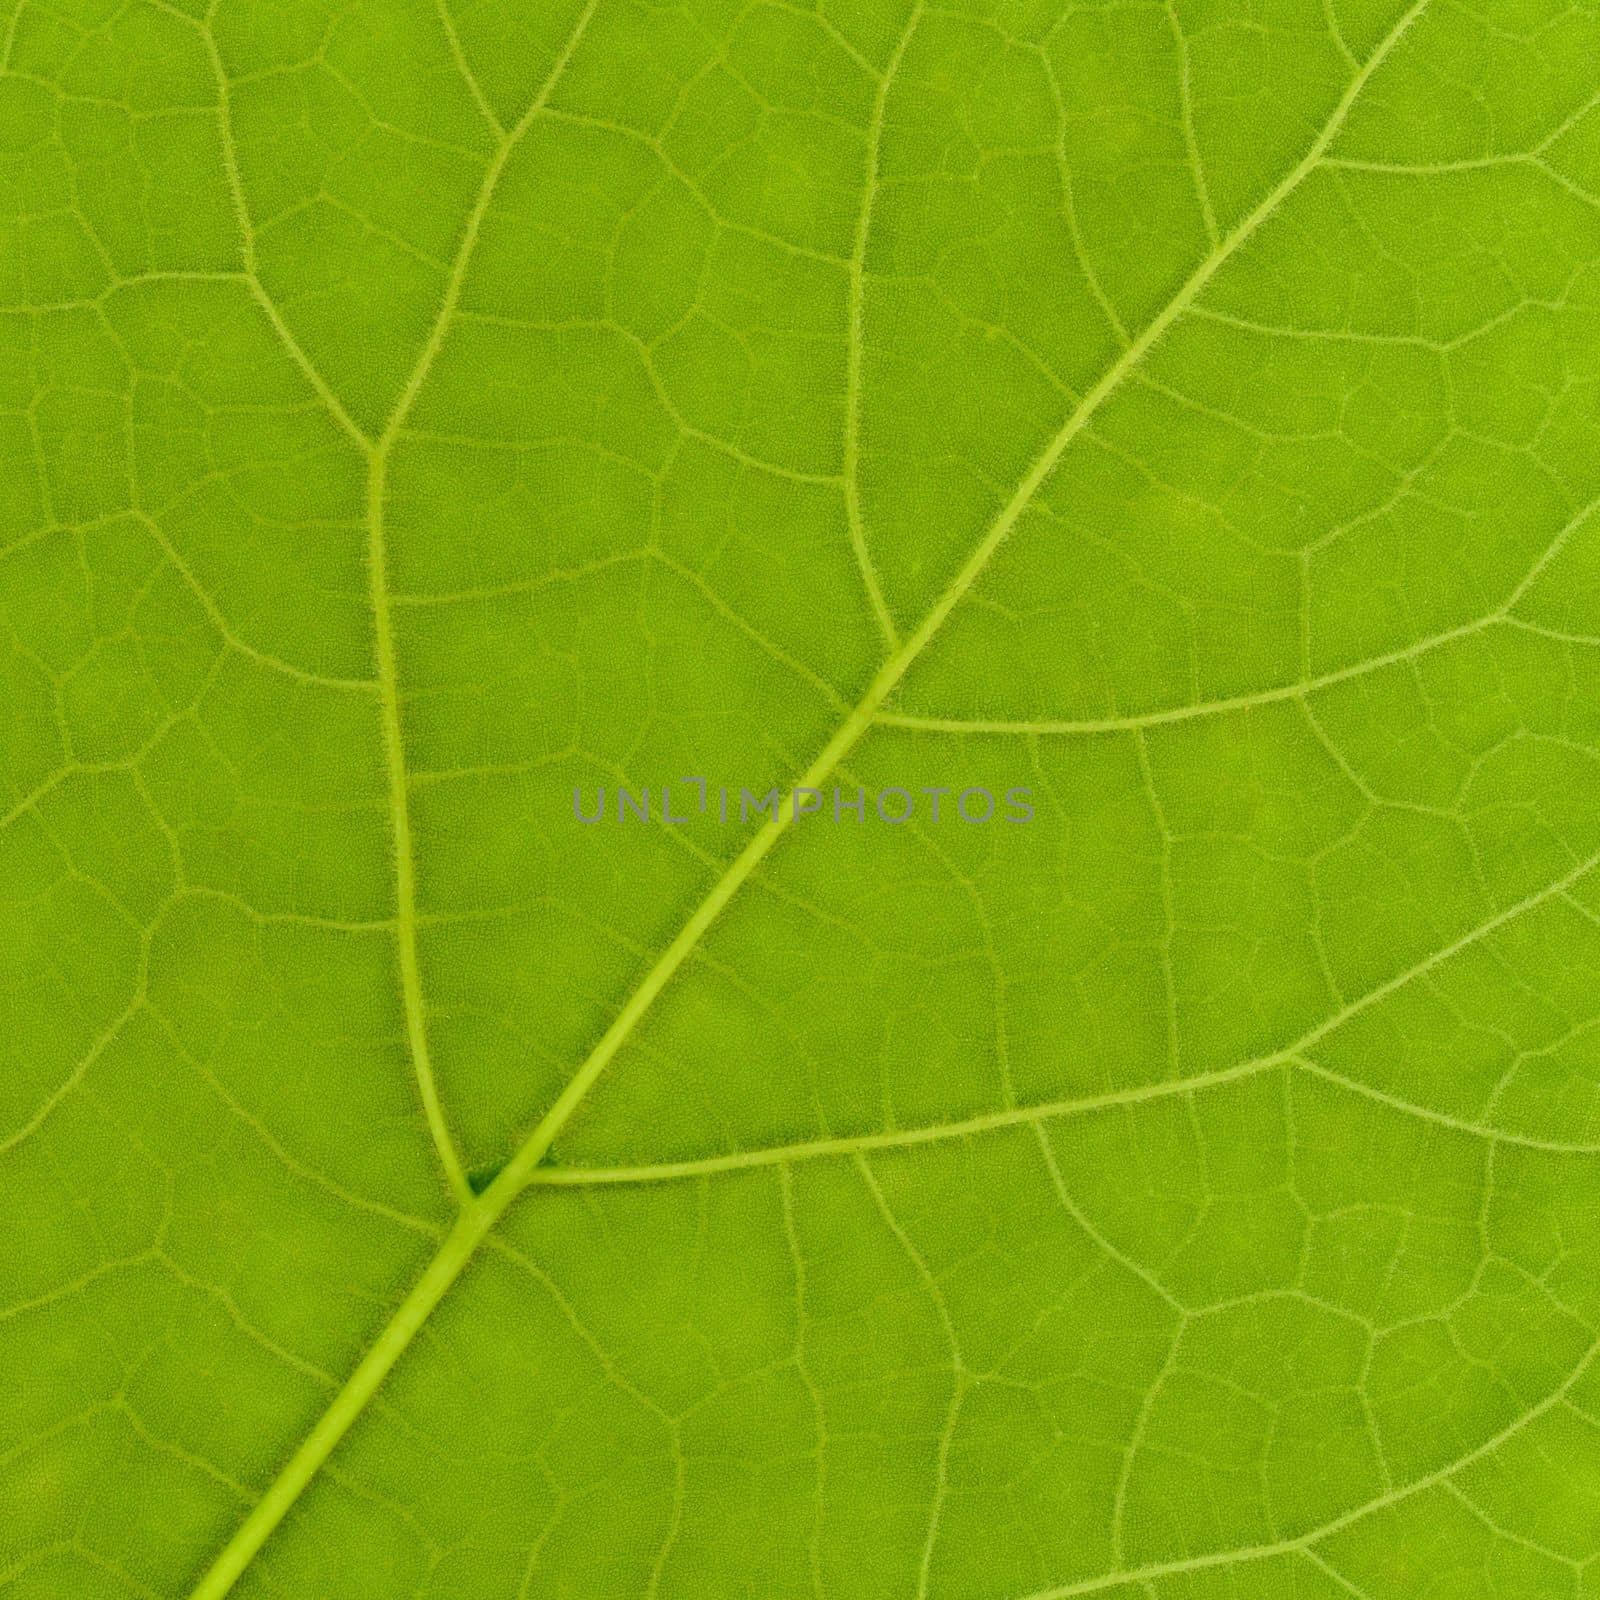 Green leaf texture useful as a background, square